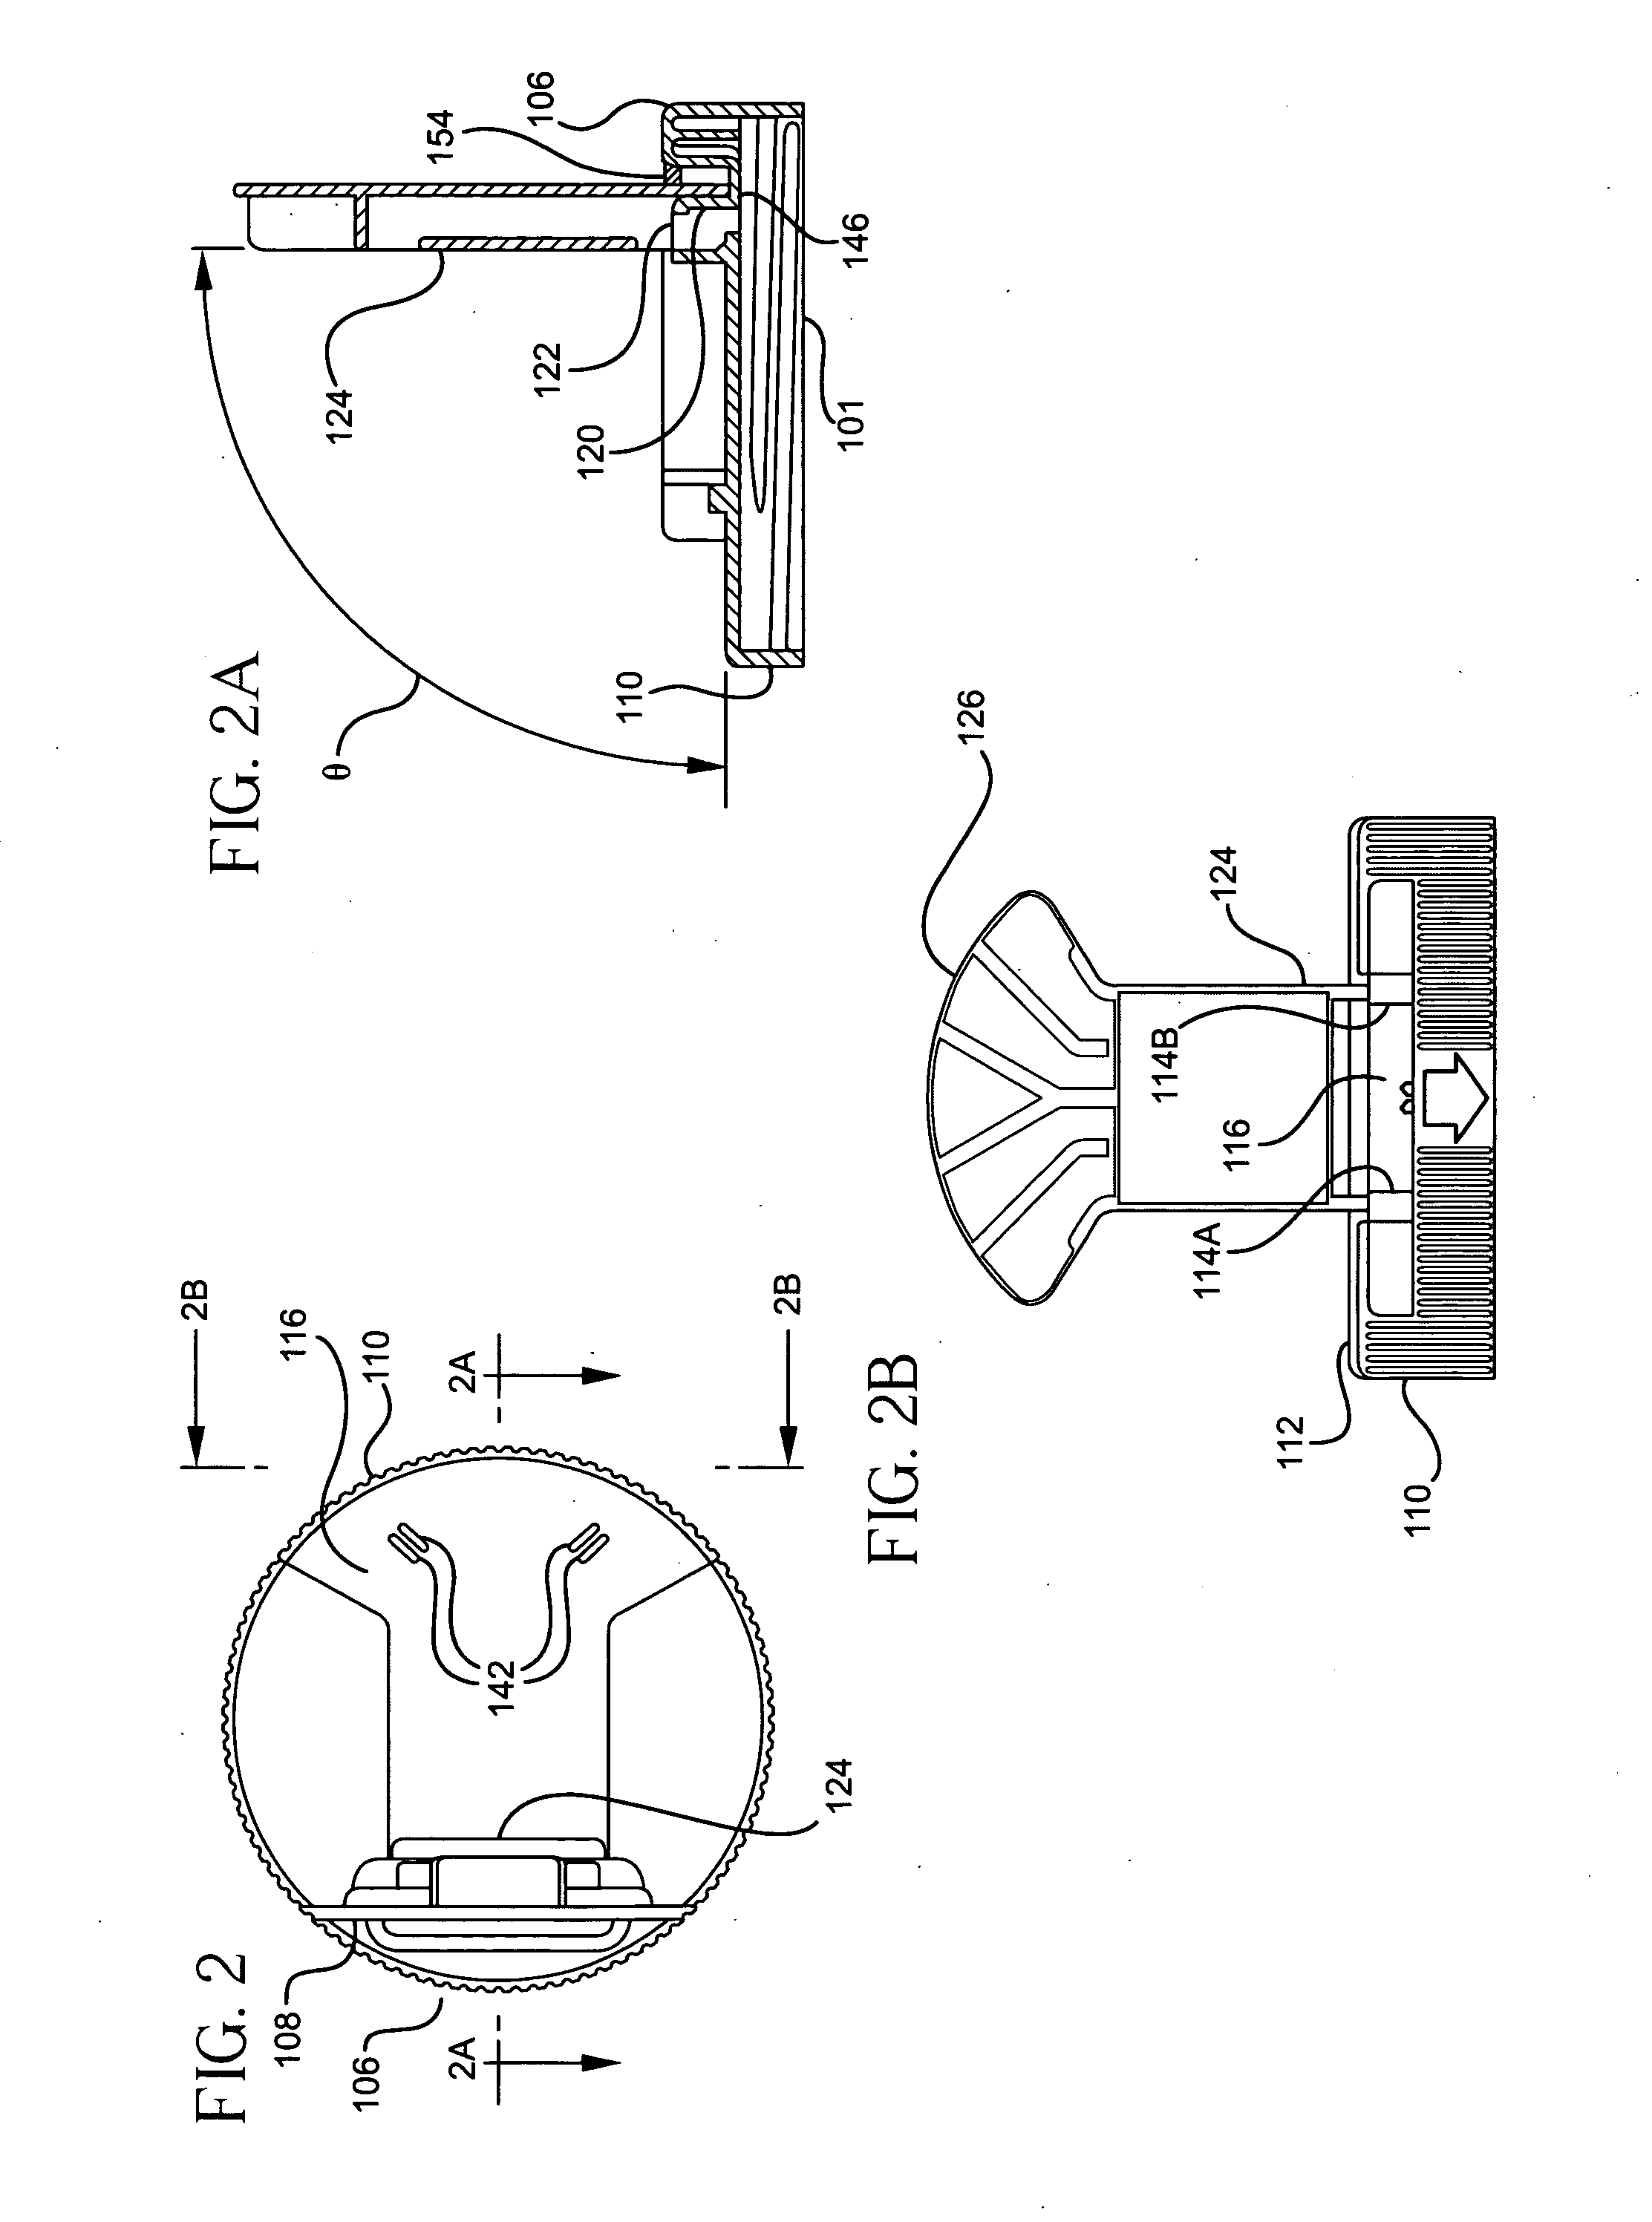 Product dispensing cap with pivotal directional spout